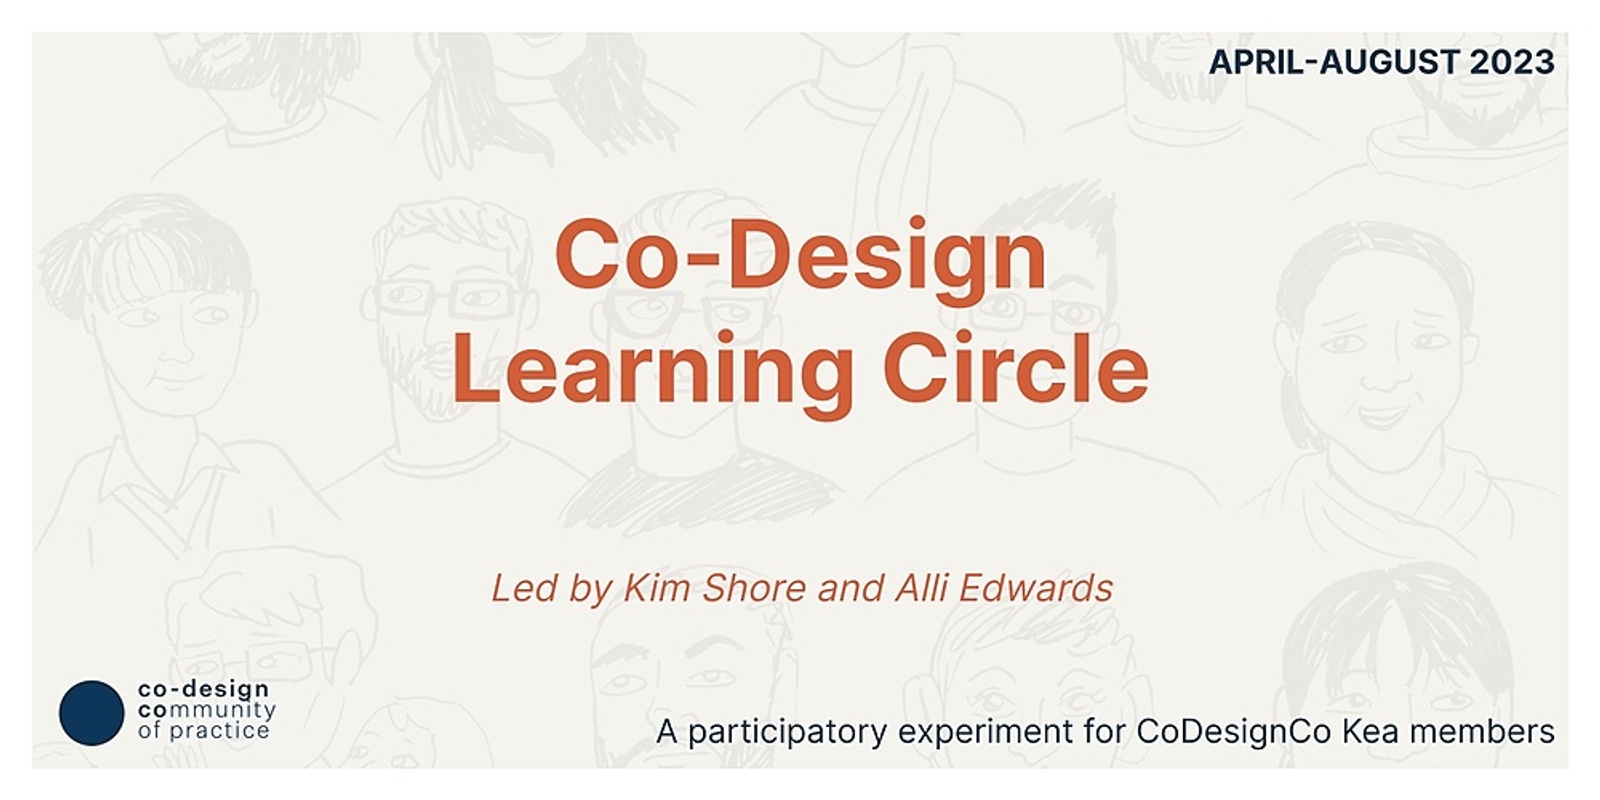 Banner image for Co-Design Learning Circle 